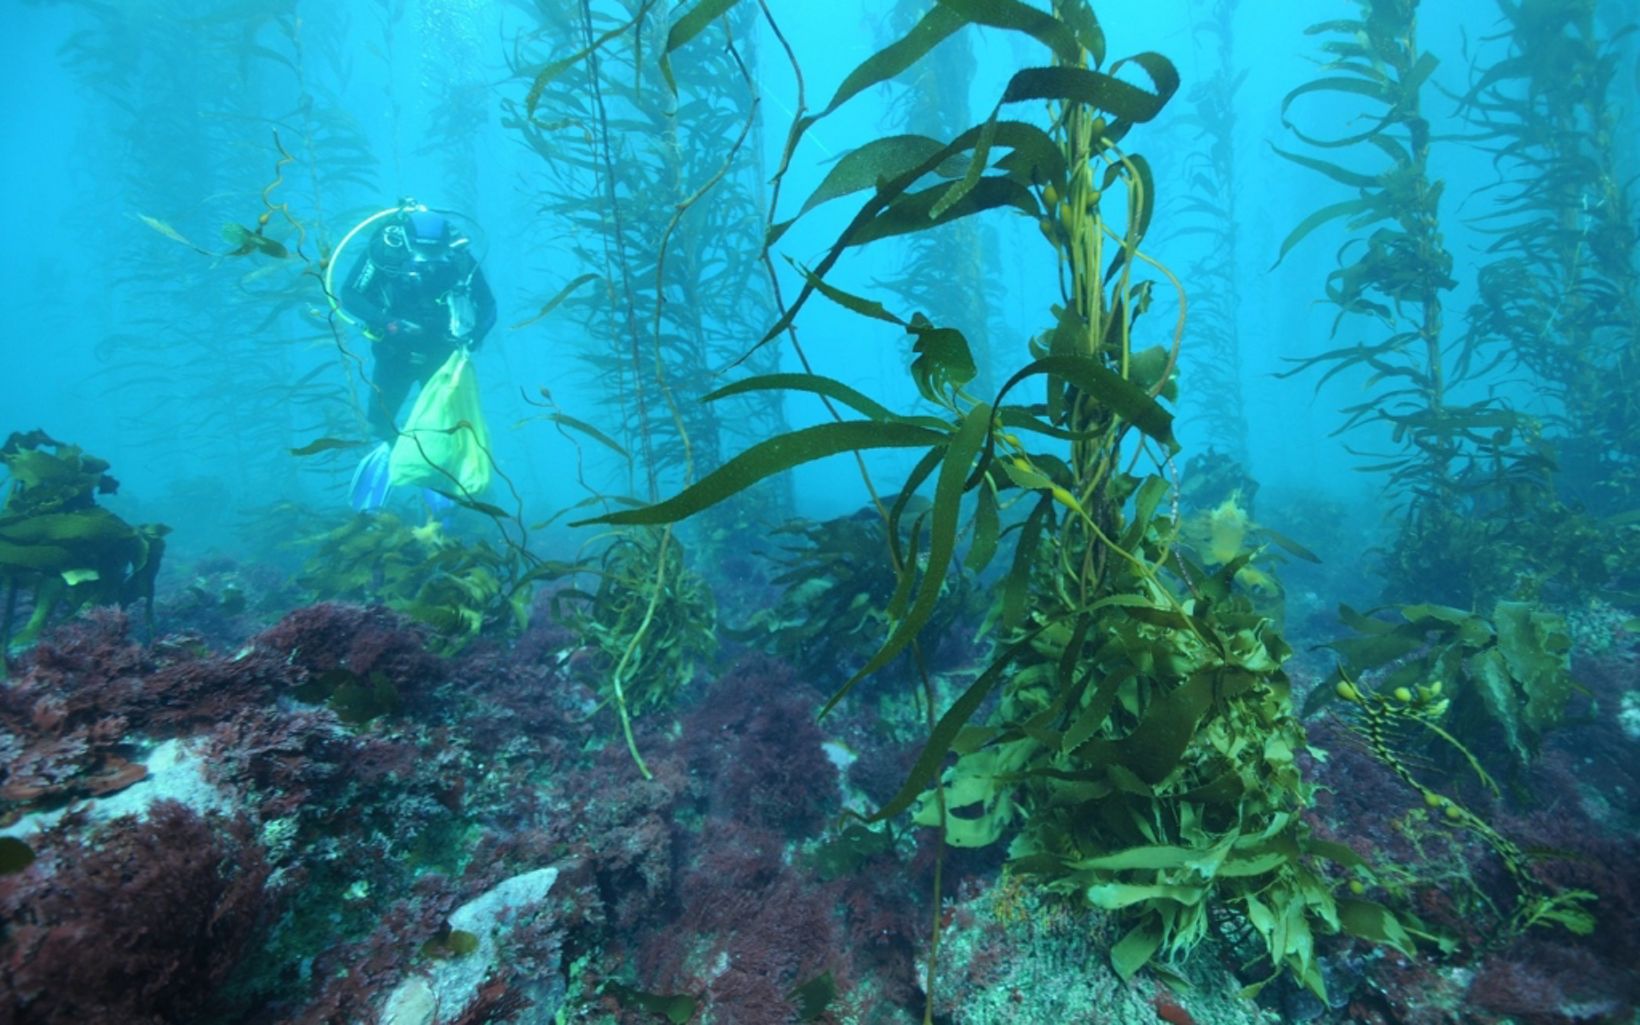 Scuba diver with a bag swimming near a kelp forest.